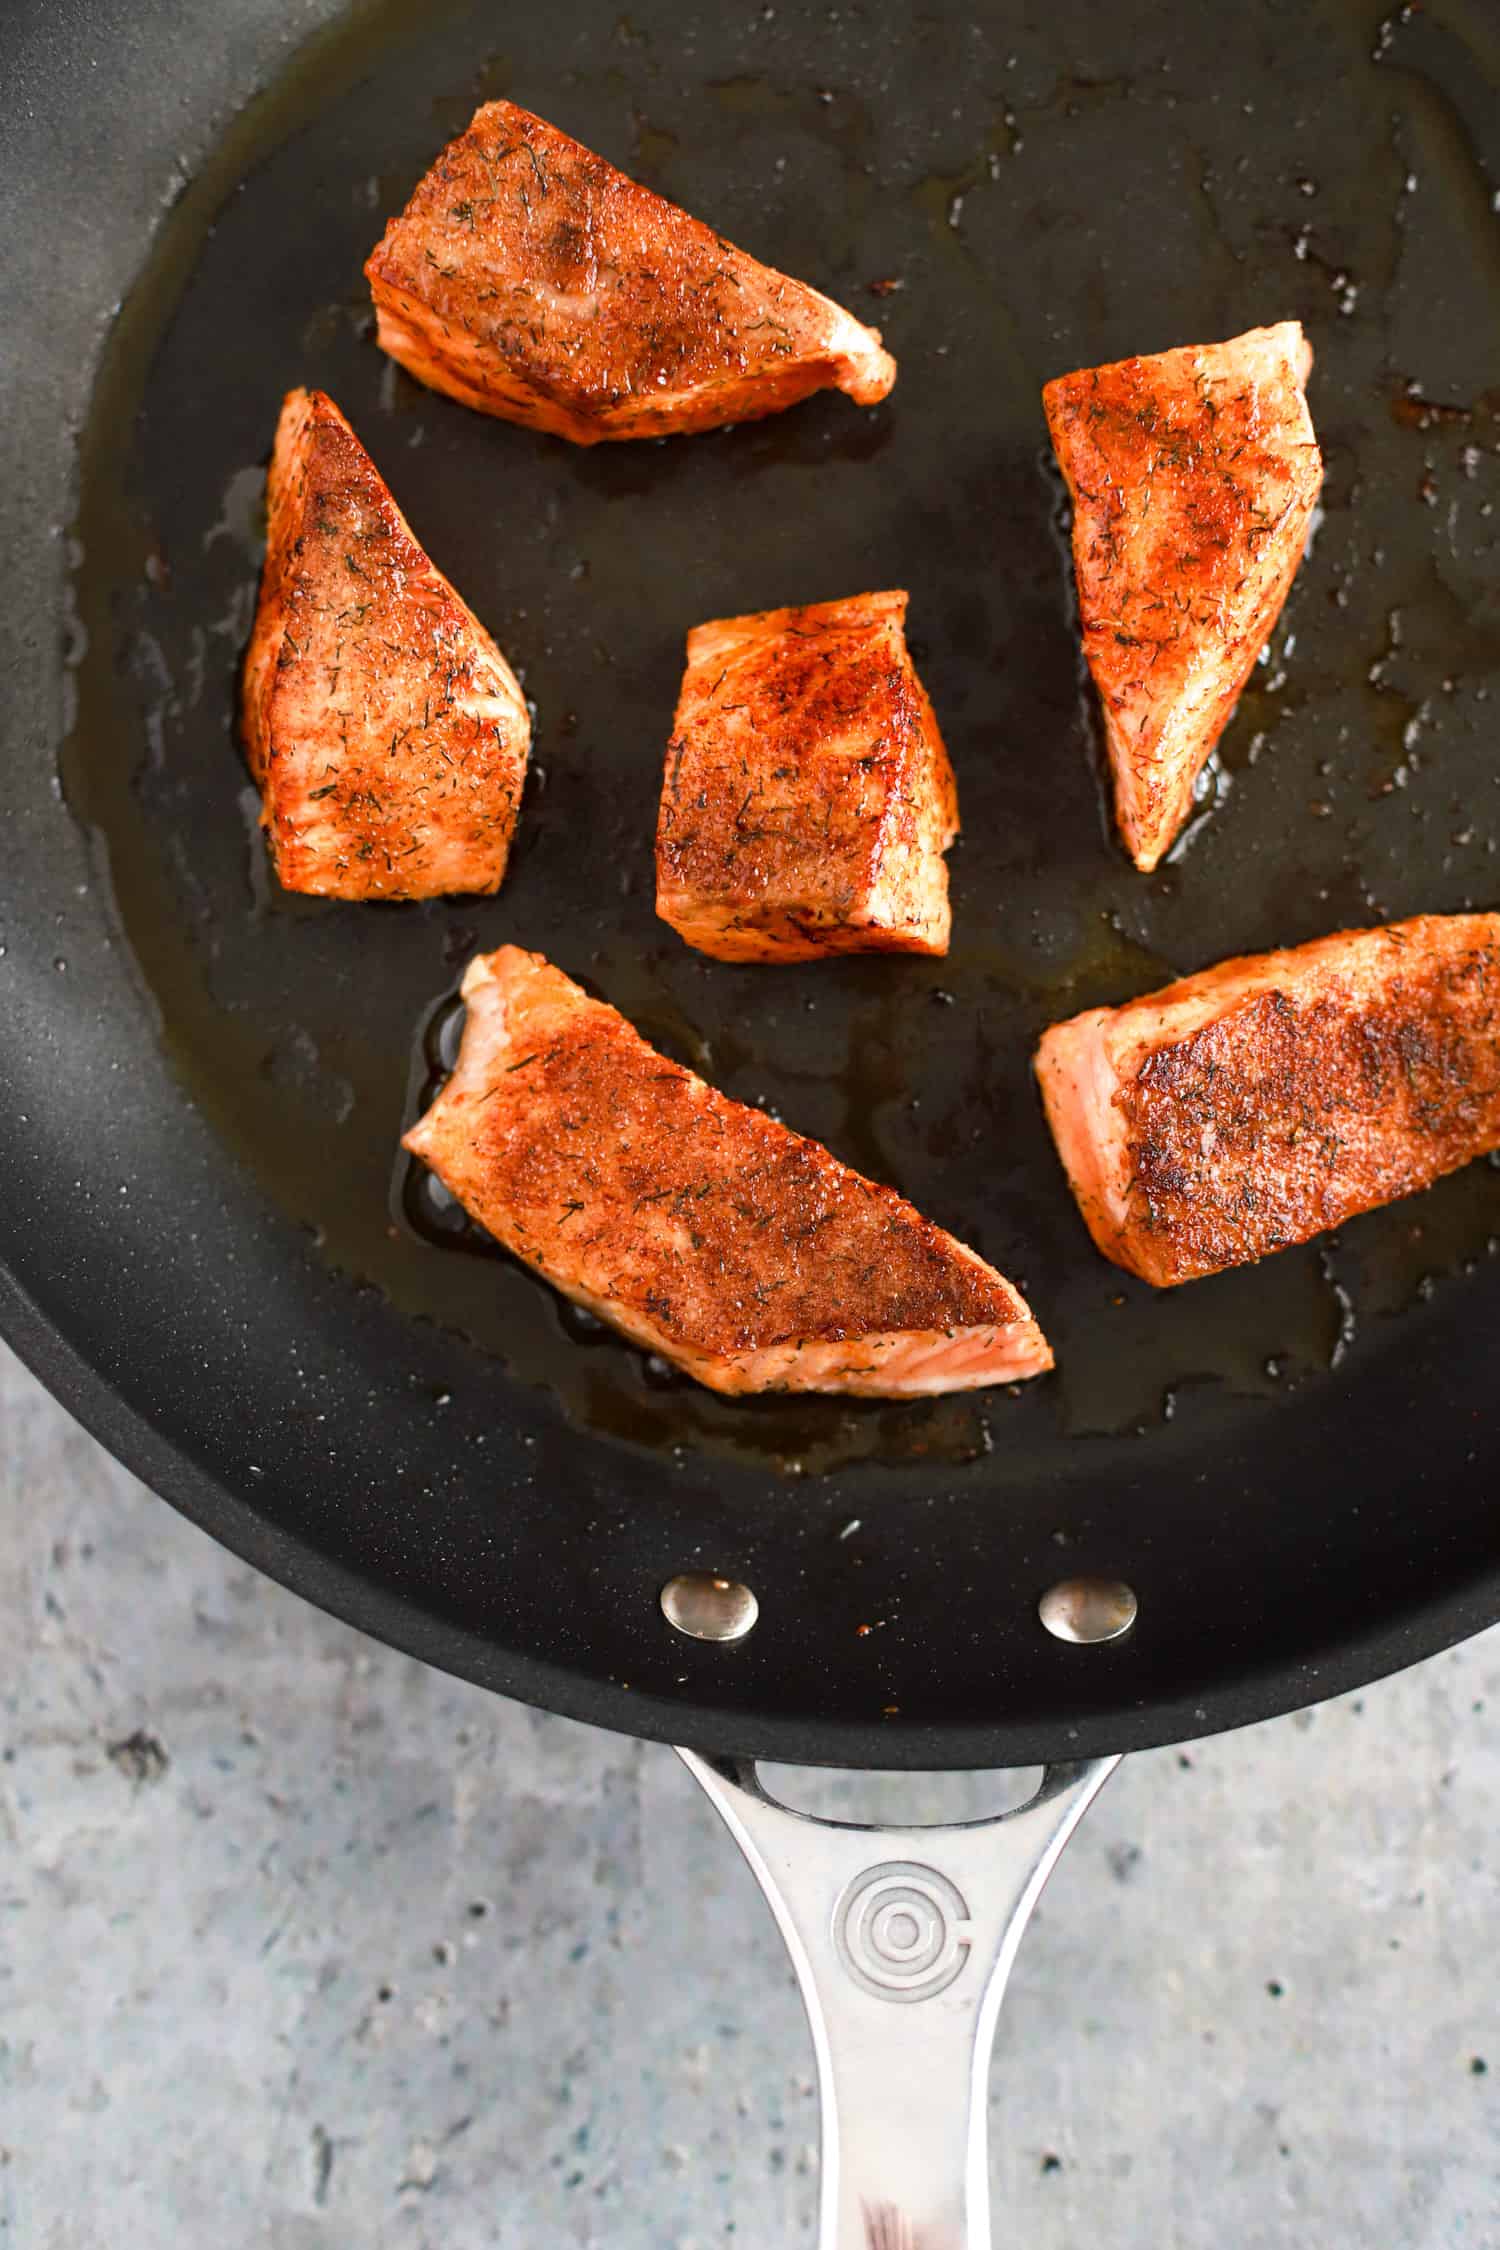 black skillet with seared salmon pieces.